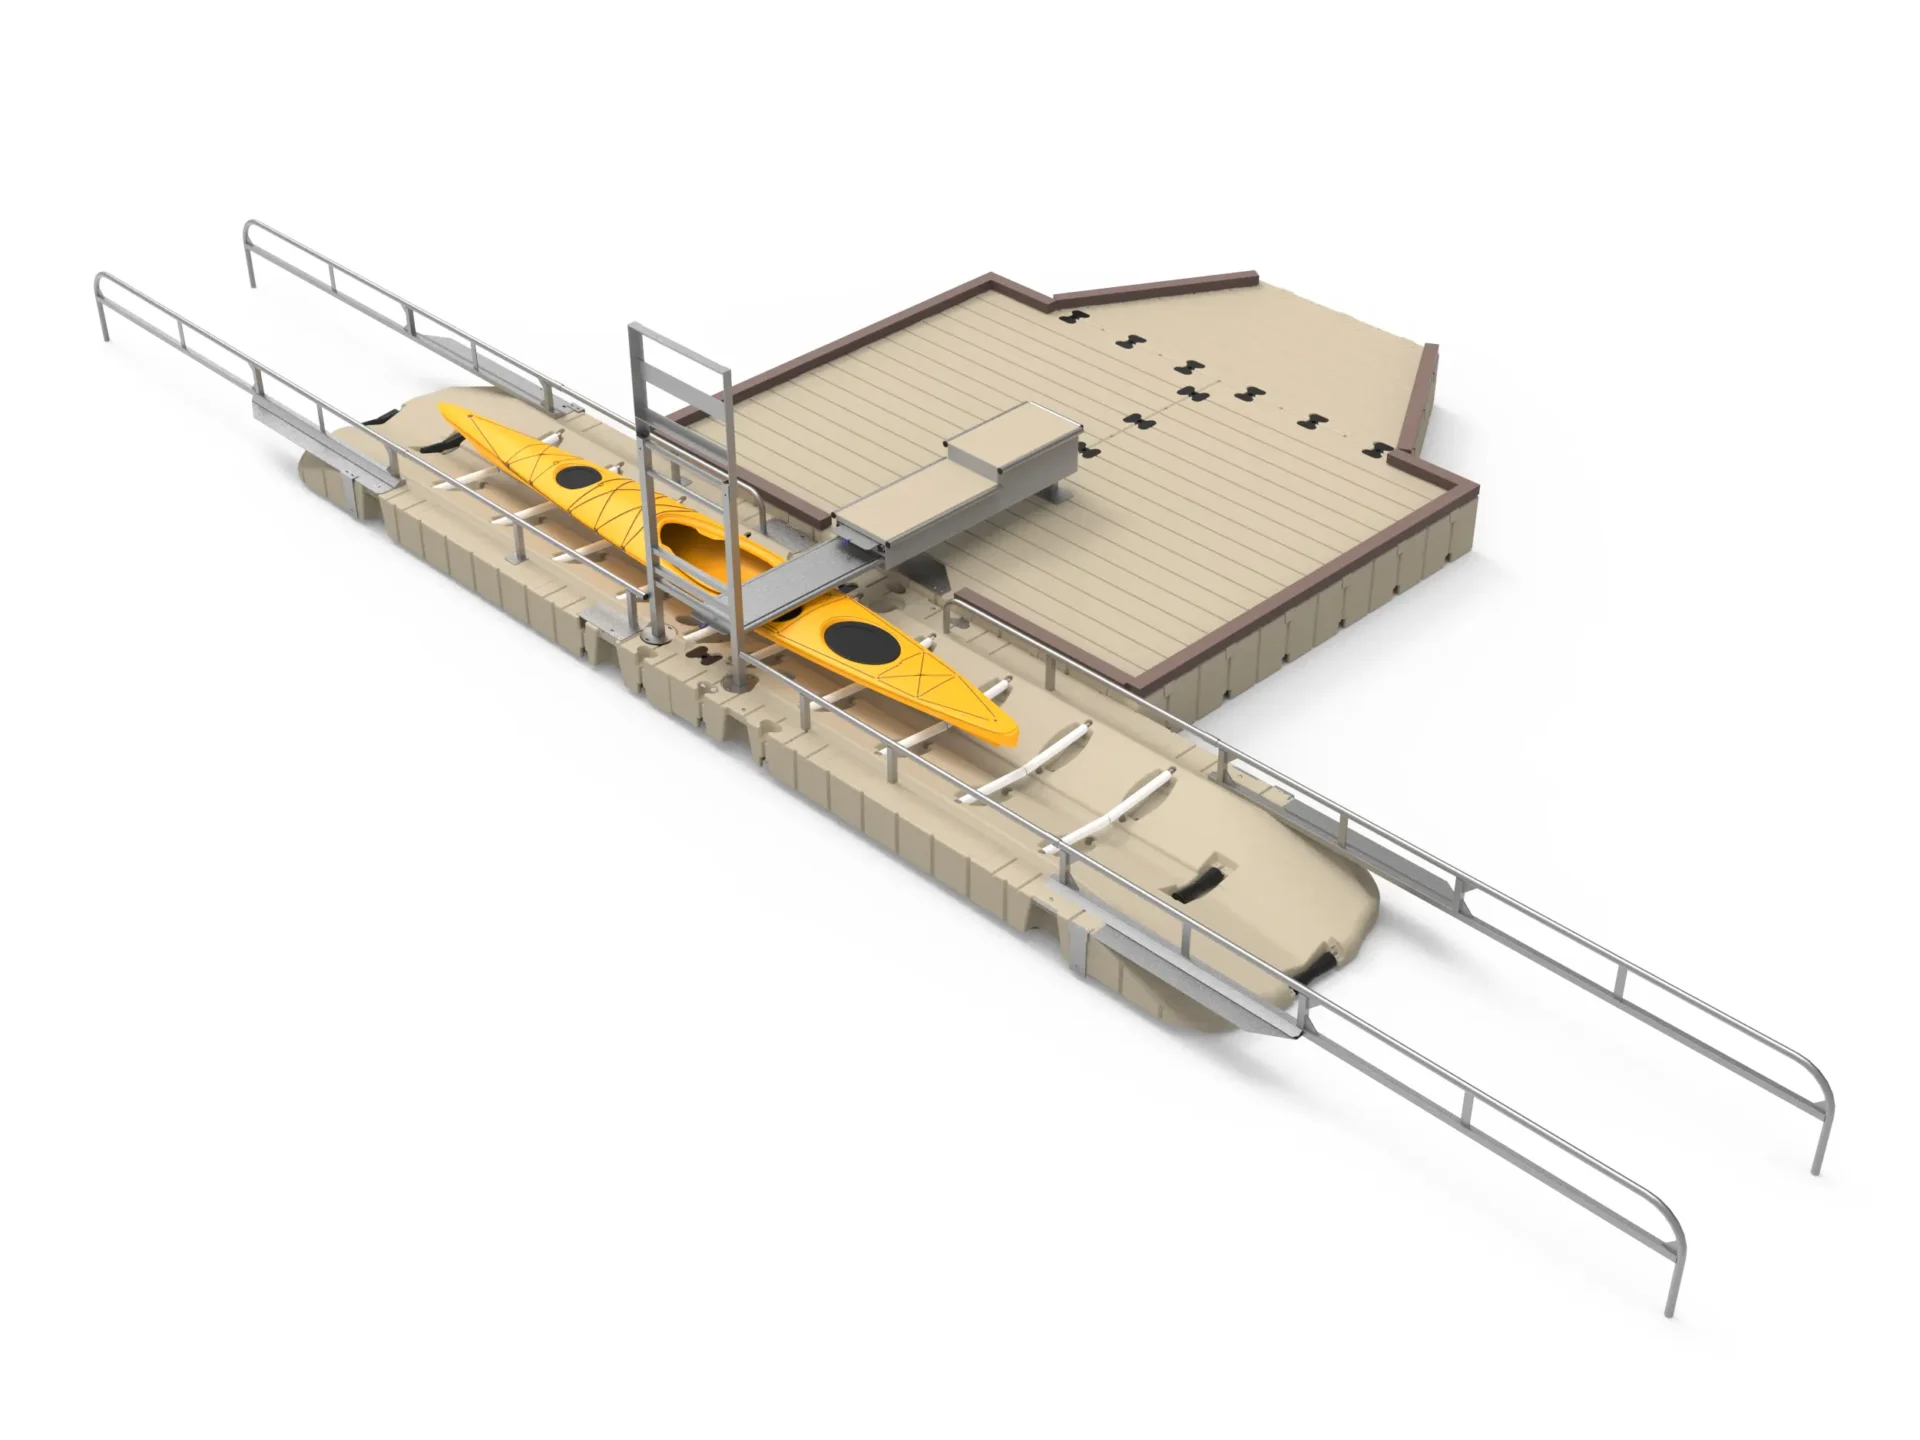 A 3 d model of the platform and tracks.